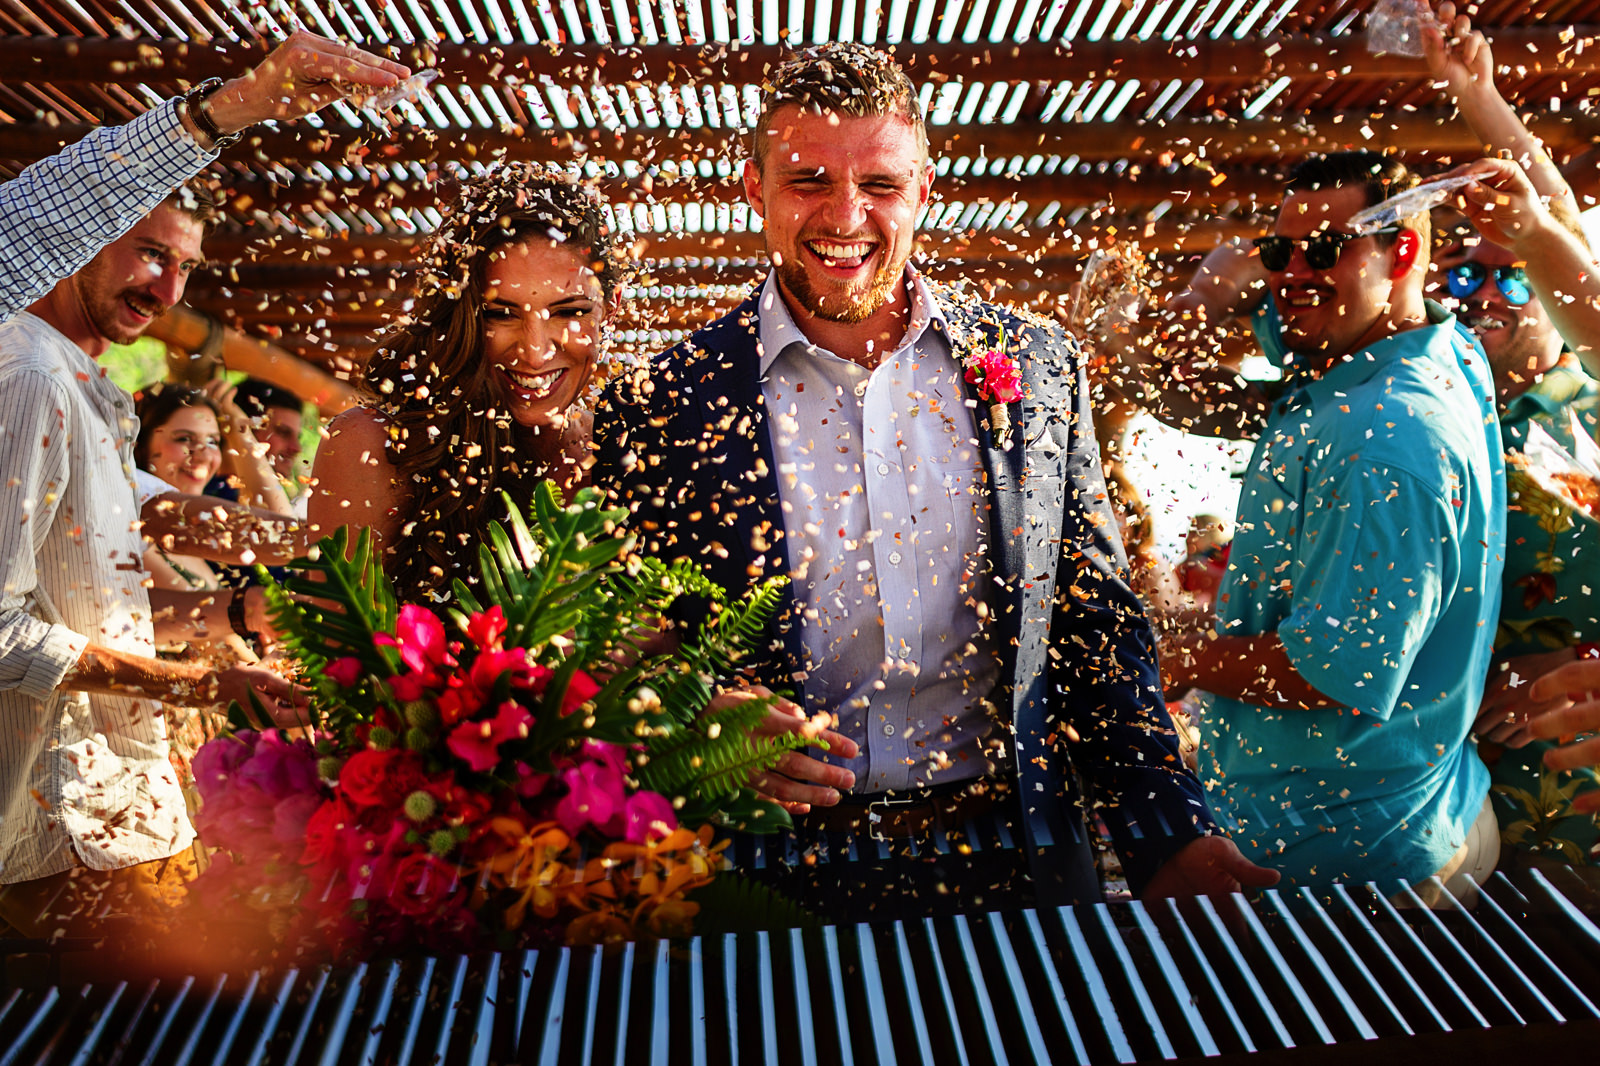 Exit of groom and bride with confetti